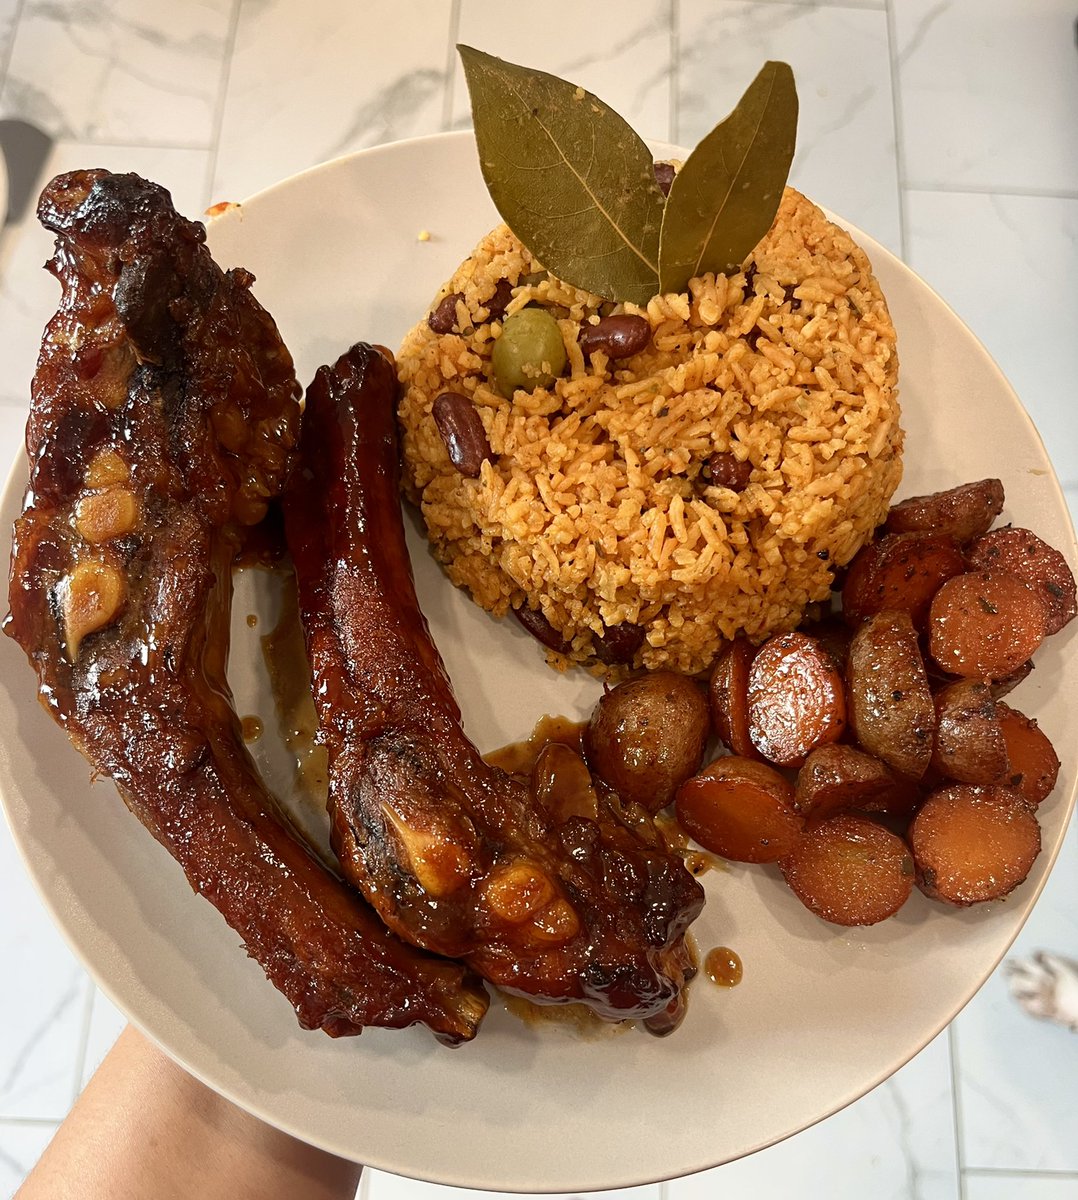 👩🏻‍🍳 Slow cooked honey bbq ribs, seasoned mini red potatoes and yellow rice with red beans. 👩🏻‍🍳 #foodie #personalchef #spanishfood #americanbbq  #Foodgram #Foodreviews #Cheferikahoffman #elite  #PrivateChef #PersonalChef #Gourmetfood #Catering #LehighValley #ChefErikaHoffman